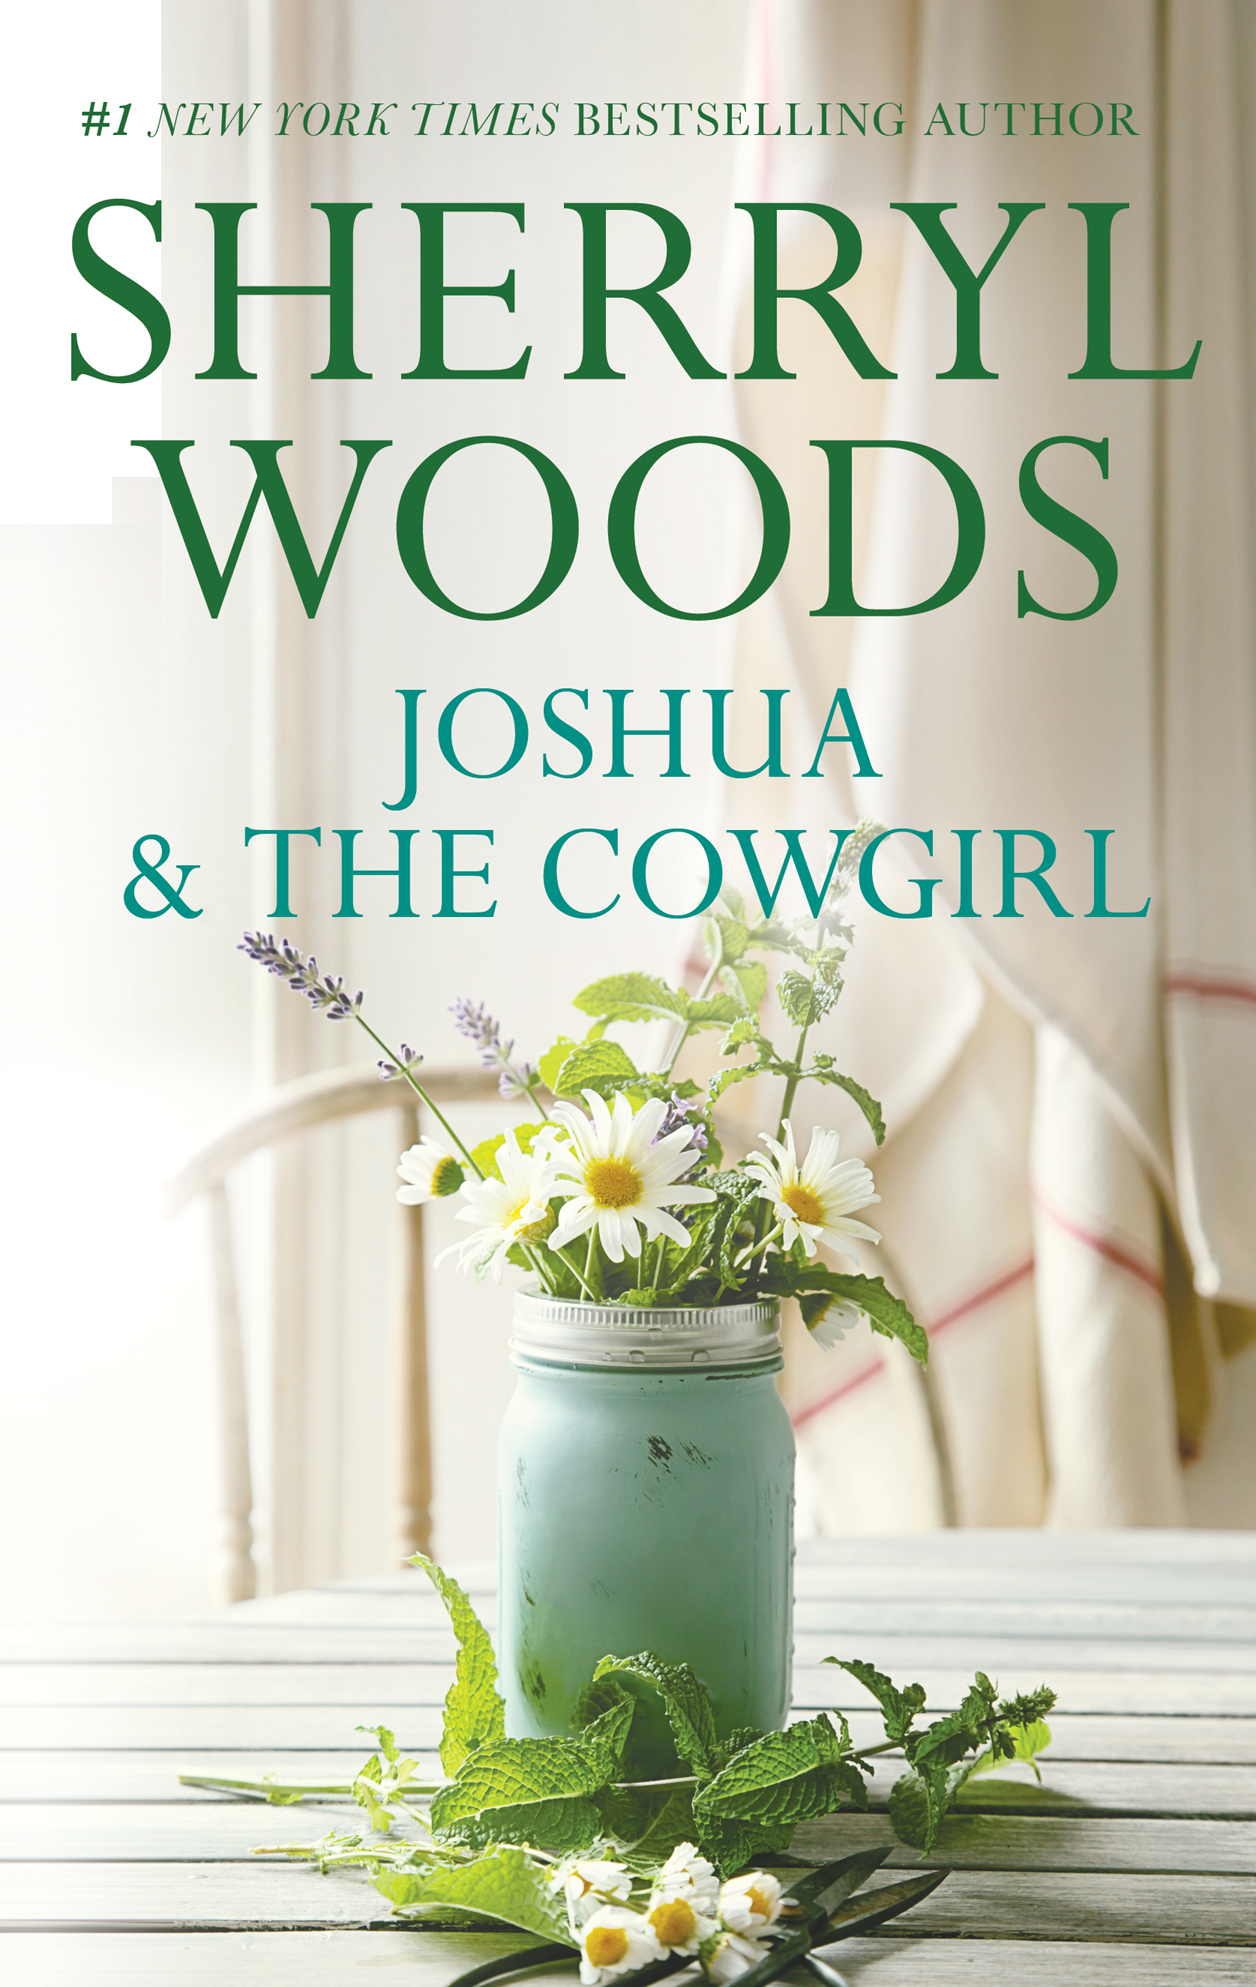 Joshua and the Cowgirl (1991)